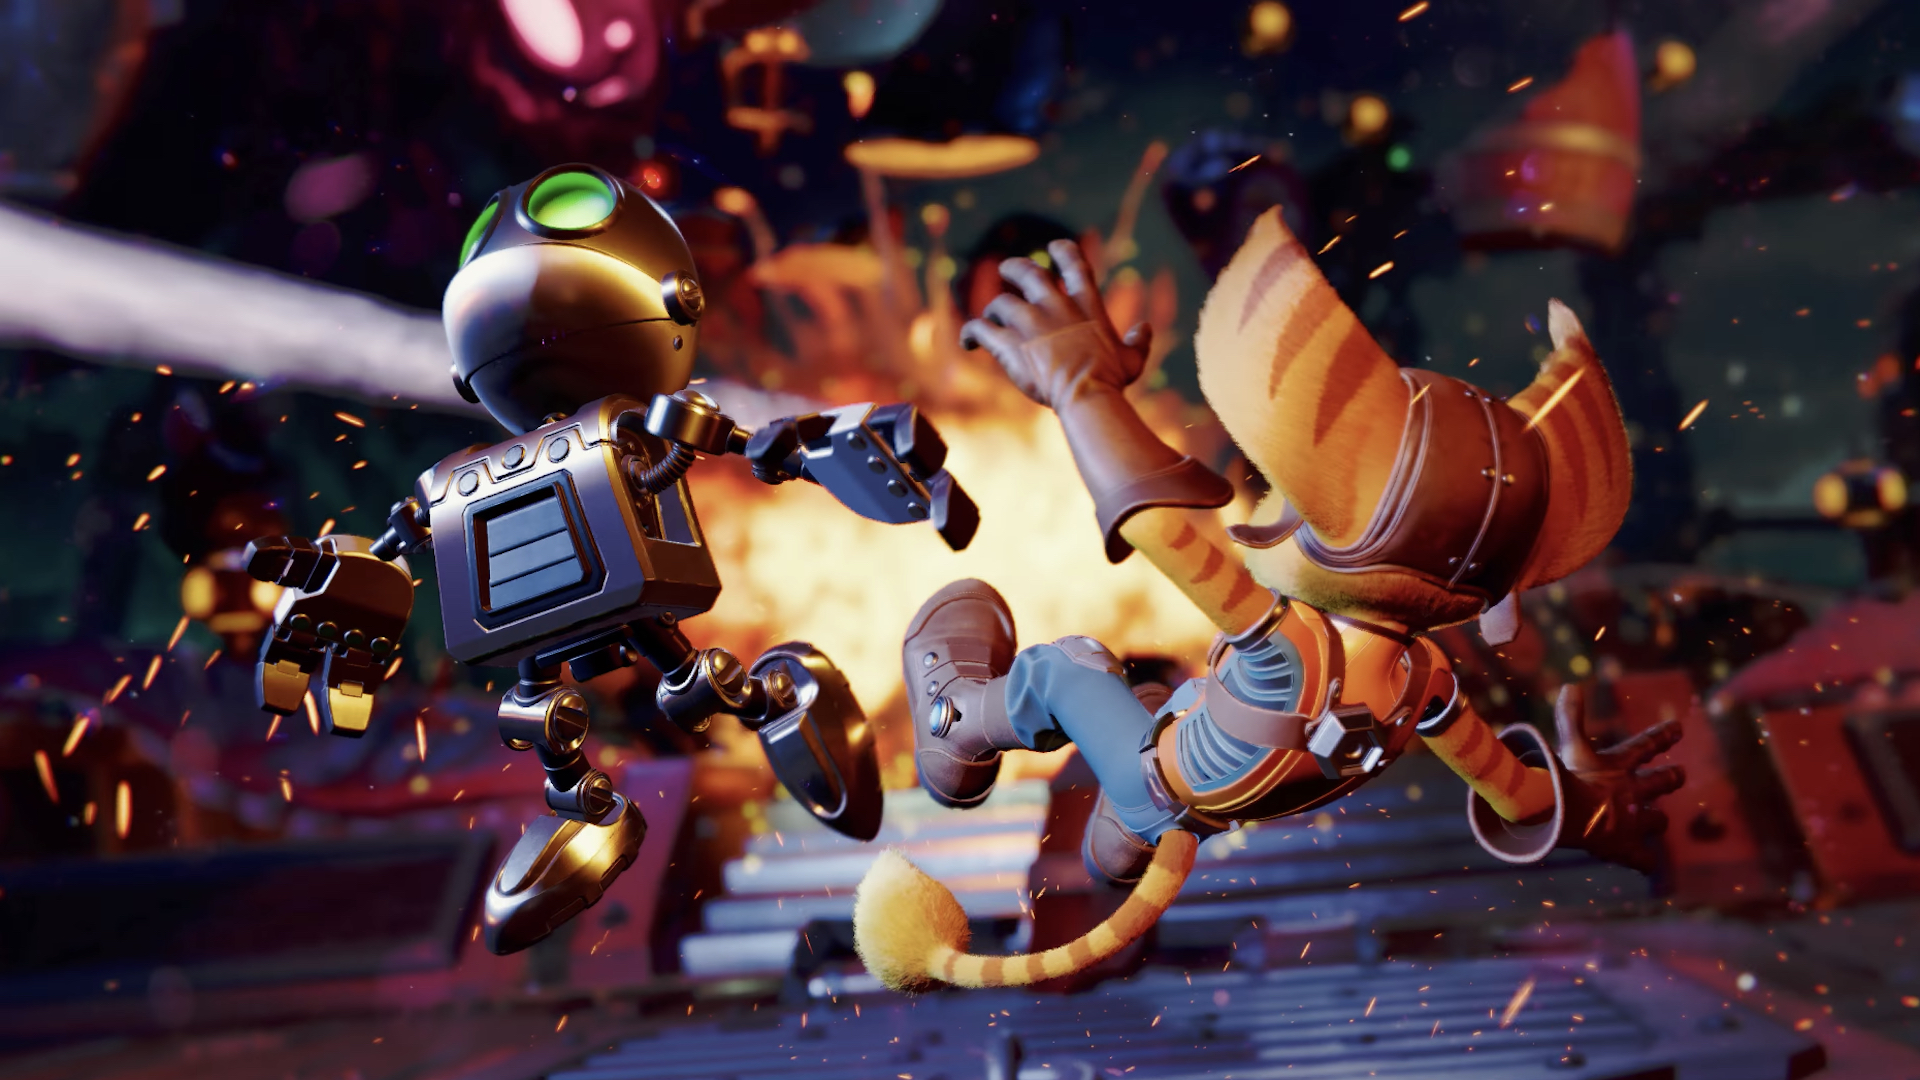 Ratchet And Clank: Rift Apart Gameplay Showcase Confirmed For Gamescom Opening Night Live